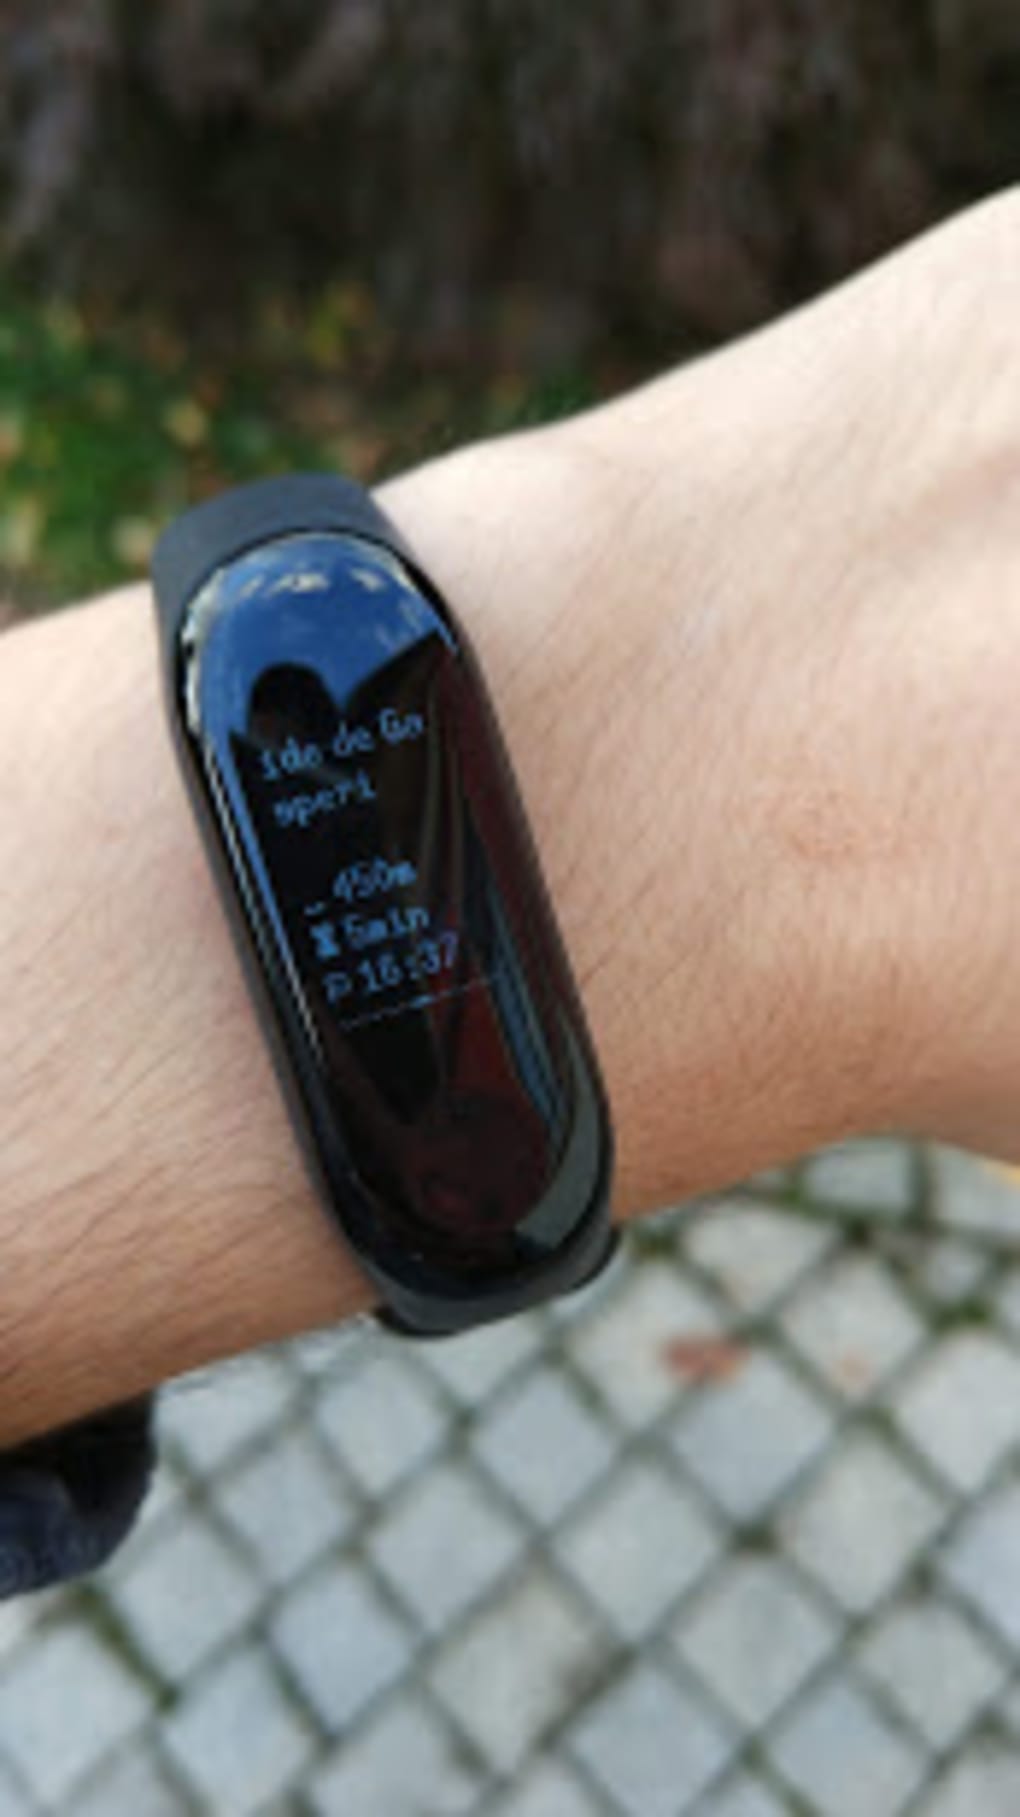 Navigator For Mi Band 6543 Bip And Cor For Android - Download